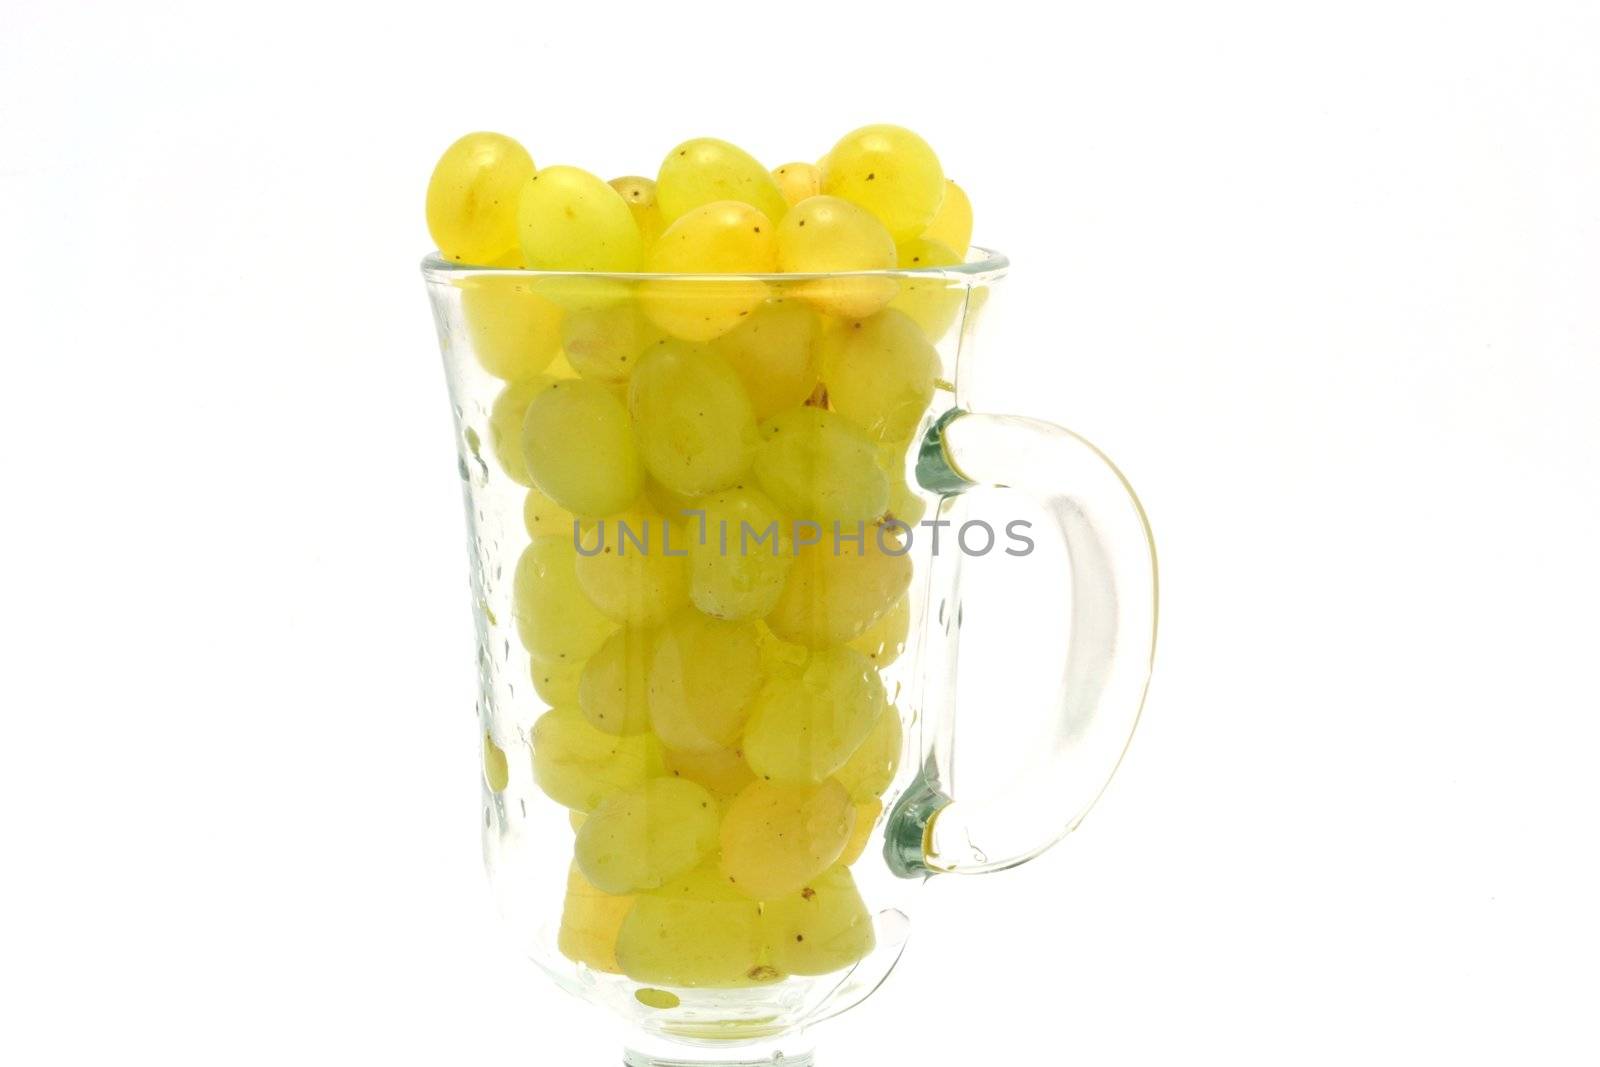 The glass cup full of yellow grapes